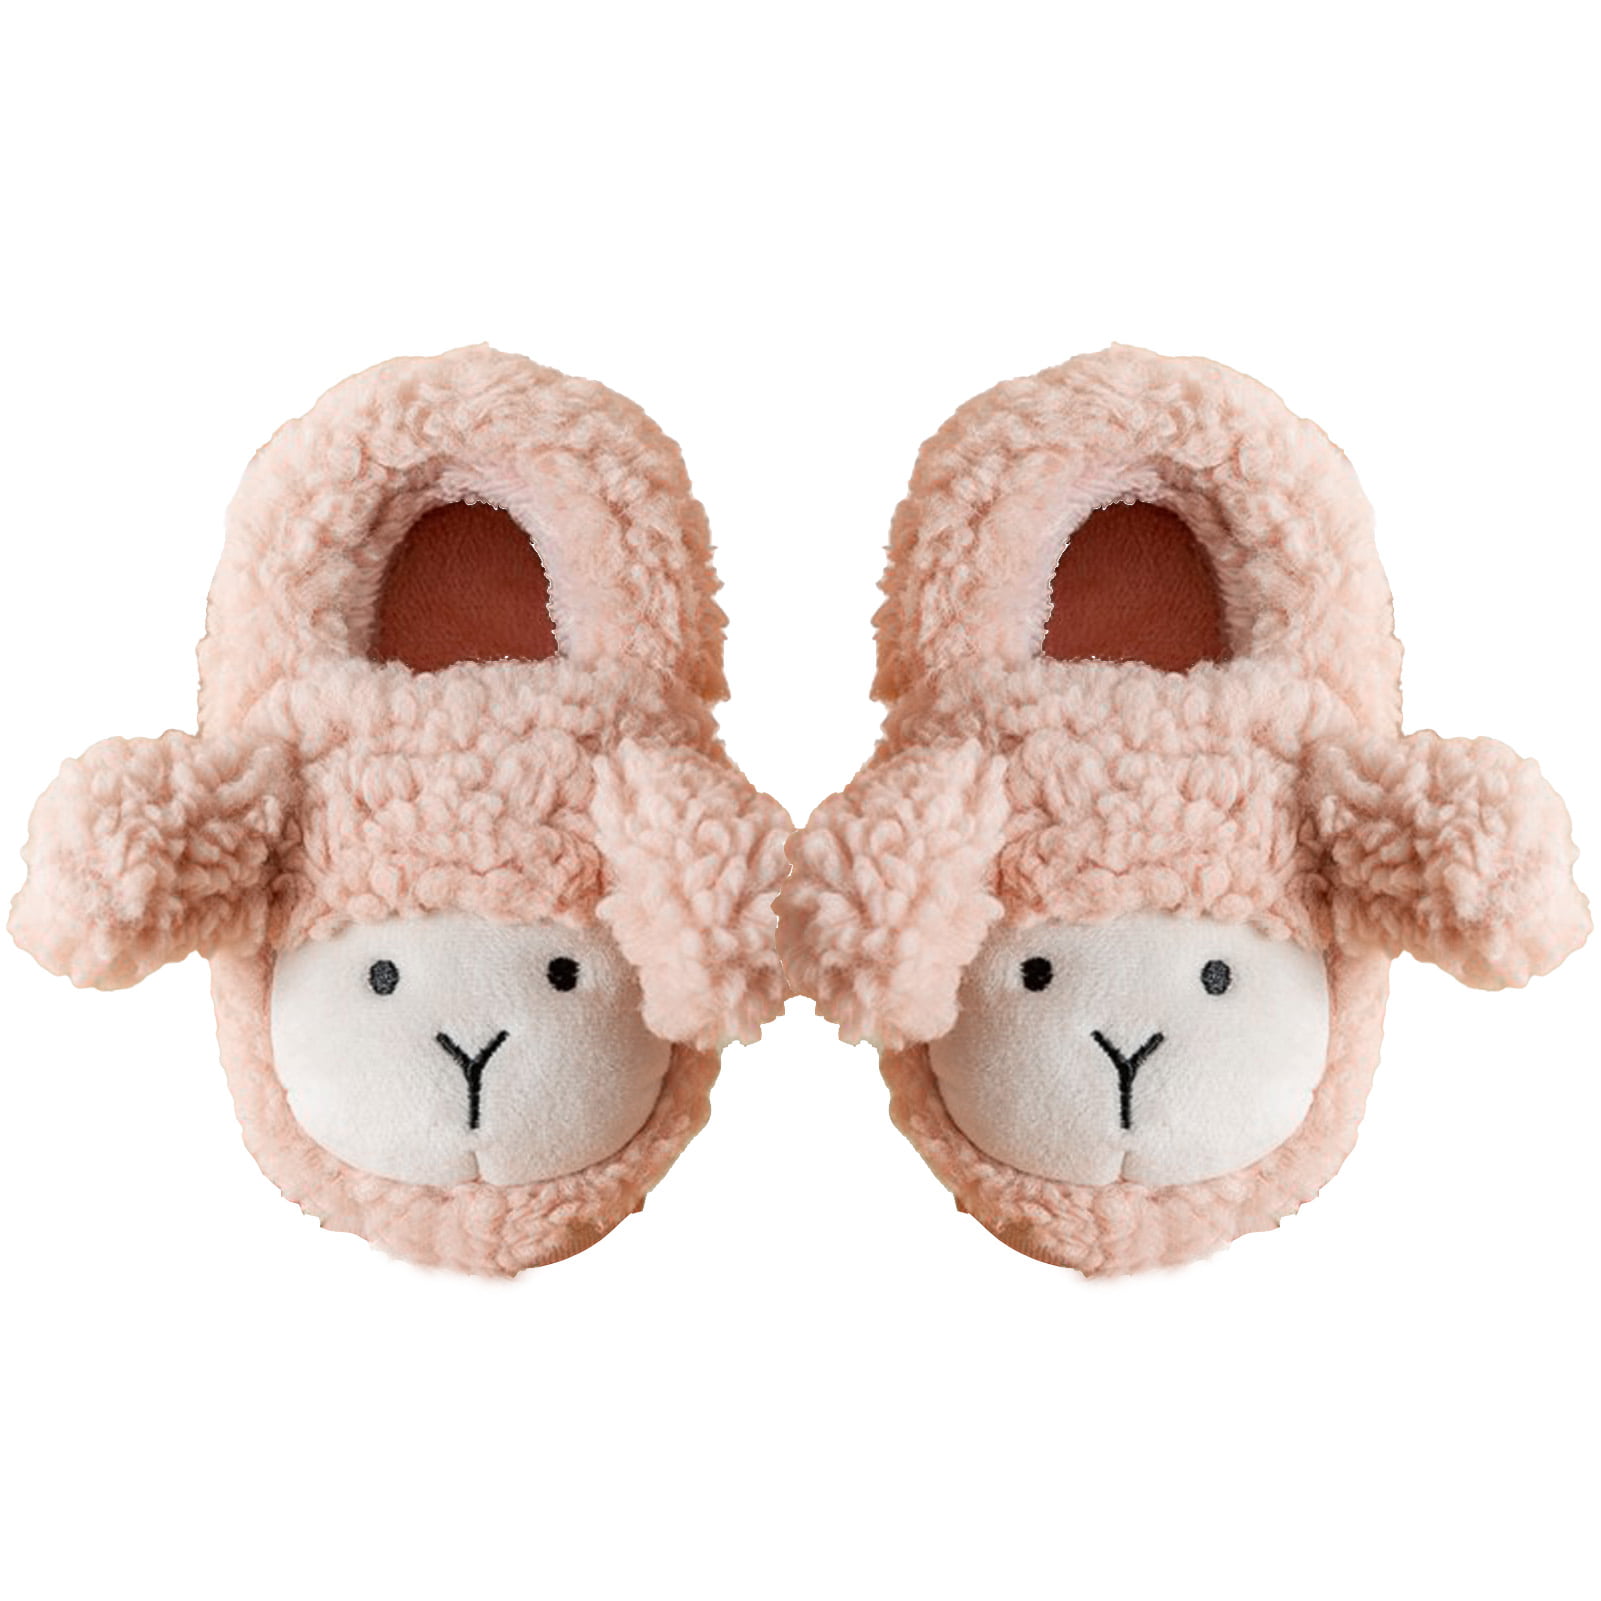 Fuzzy Lamb Sheep Animal Slippers for Boys Girls Non-Slip Fluffy Cozy Home  Shoes with Plush Fleece Lining Indoor Outdoor Slippers 